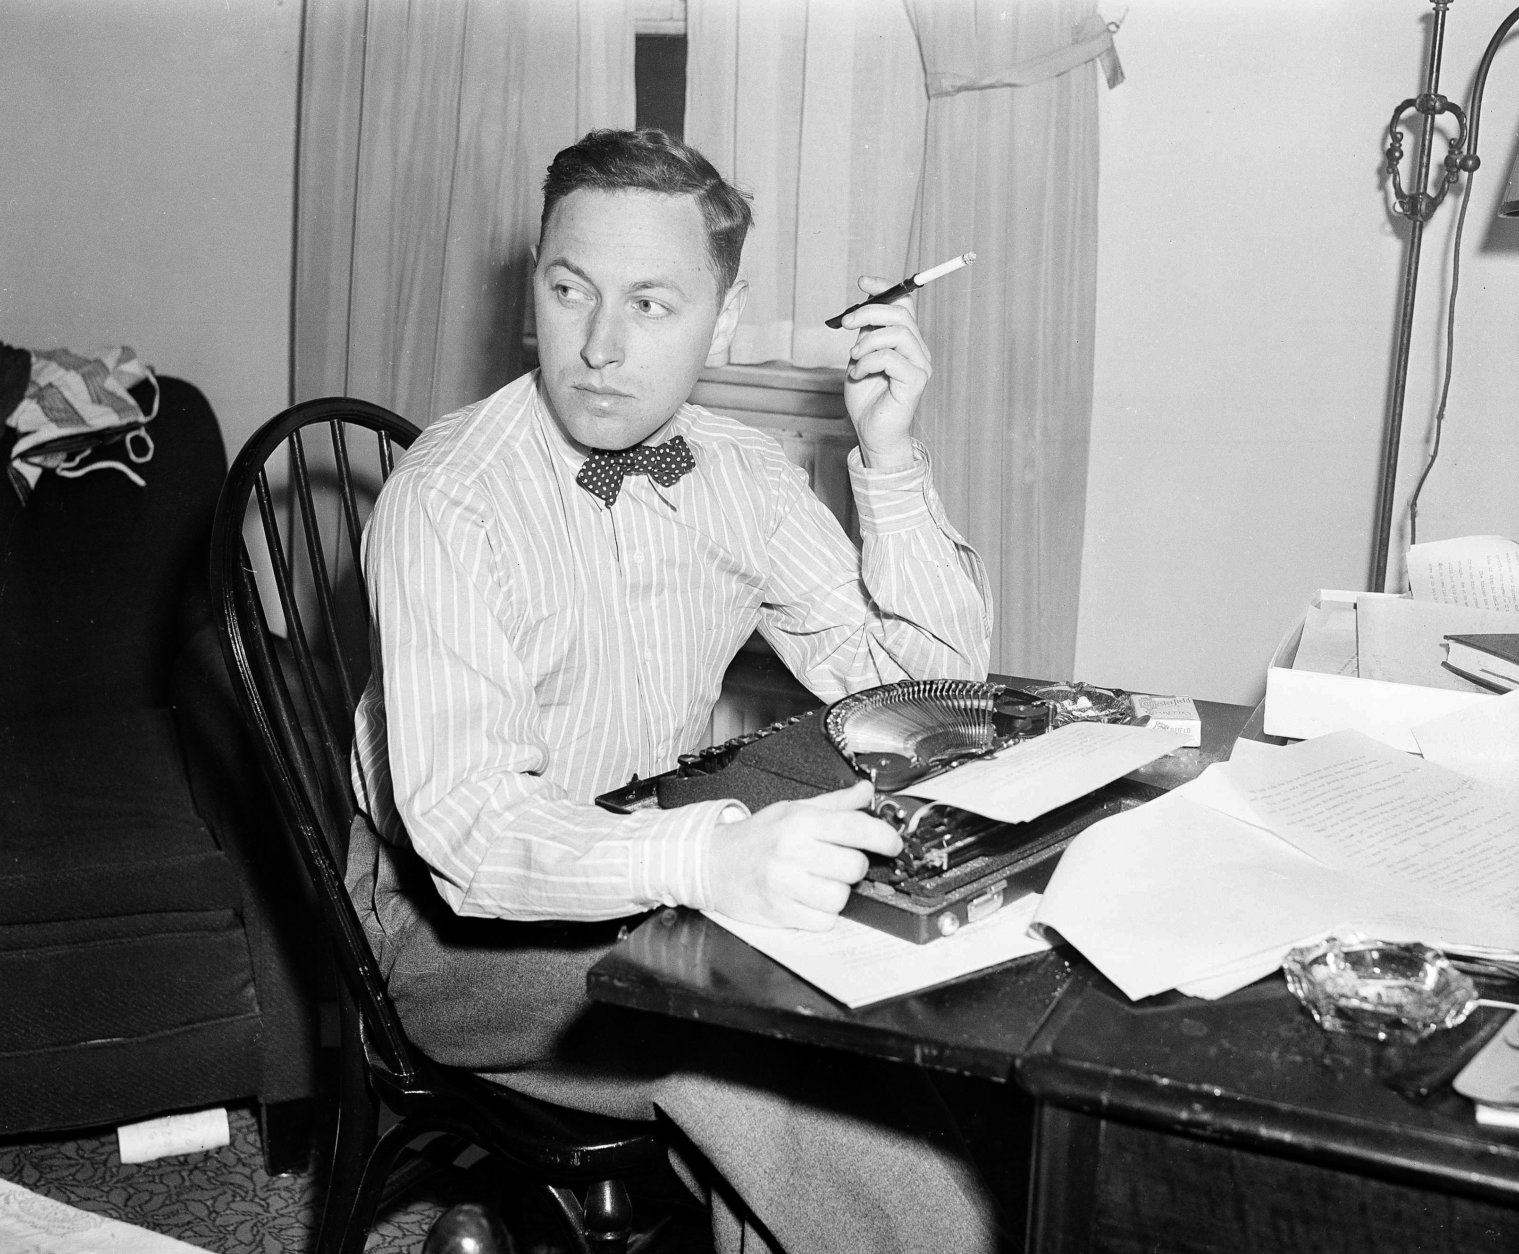 FILE - This Nov. 11, 1940 file photo shows playwright Tennessee Williams at his typewriter in New York.  Williams The Eye That Saw Death, will appear in the spring issue of The Strand Magazine.   The Eye That Saw Death has a fable-like quality even as its plot recalls Poes The Tell-Tale Heart.  (AP Photo/Dan Grossi, File)